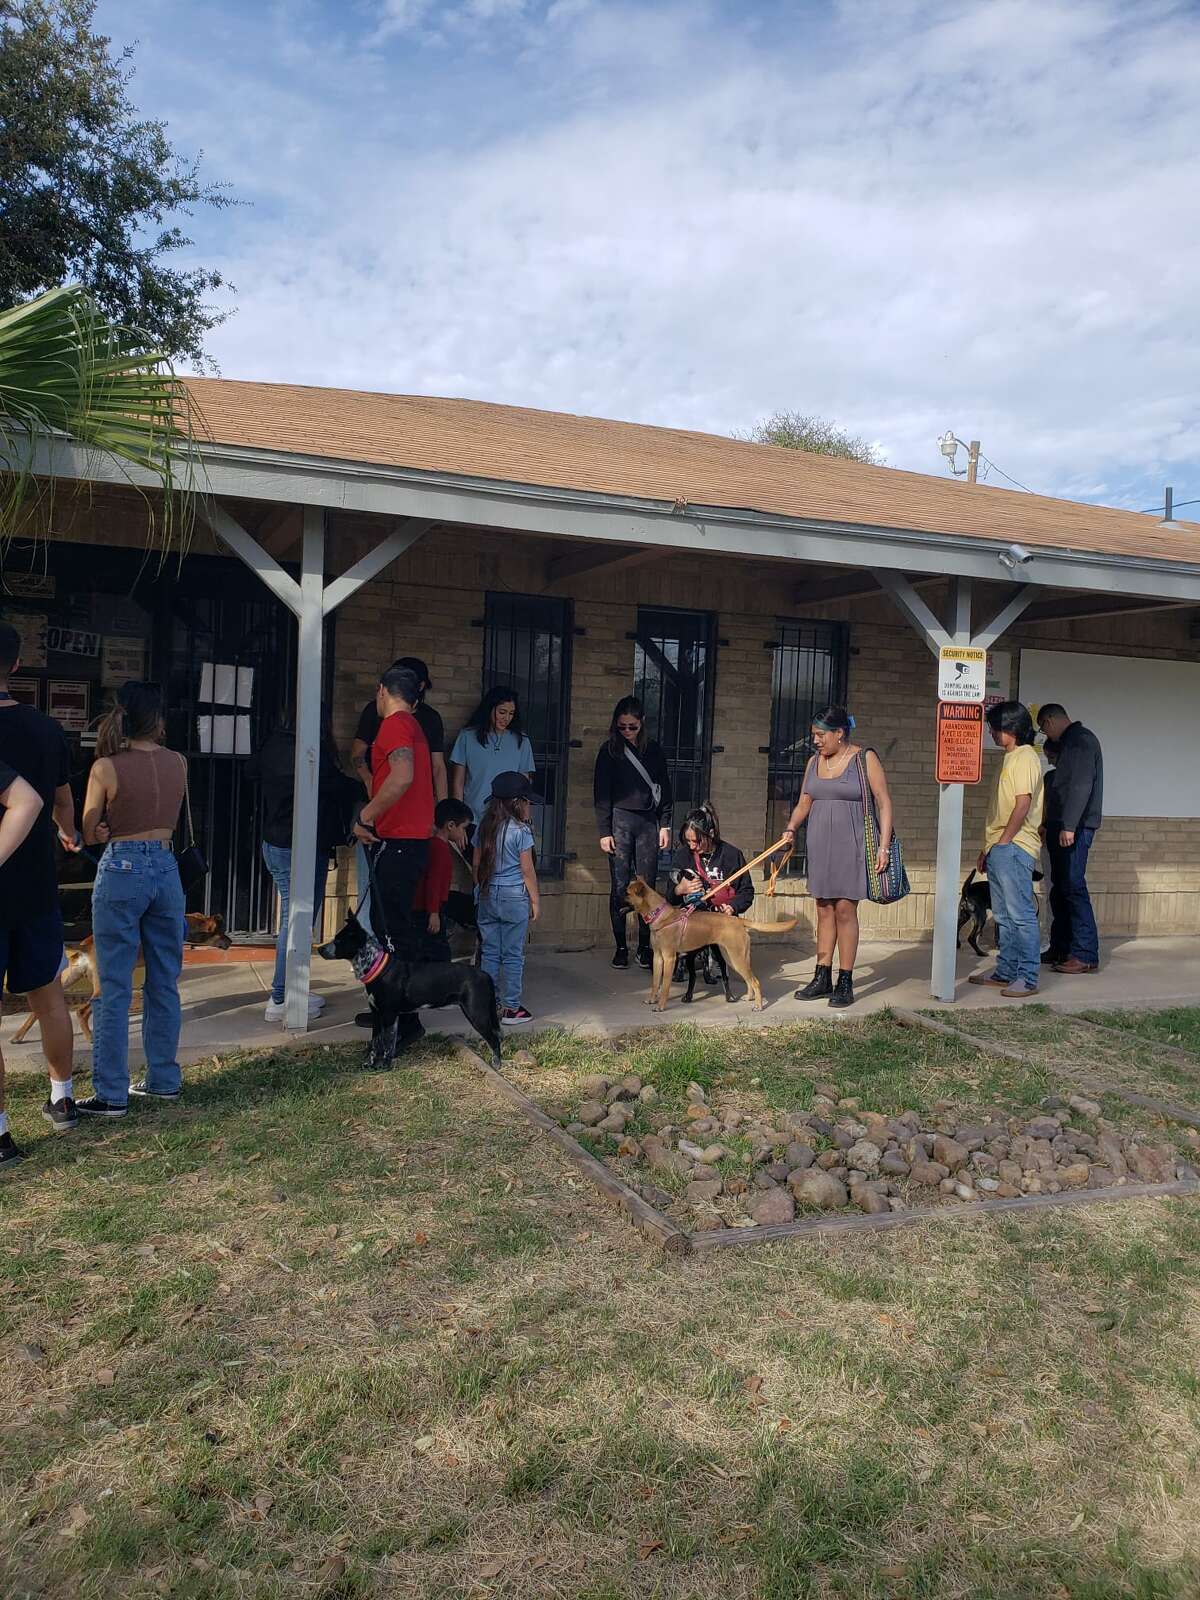 The Laredo Animal Protective Society hosted a Valentine's Doggy Date event from 9 a.m. to 4 p.m. on Sunday, Feb. 12.